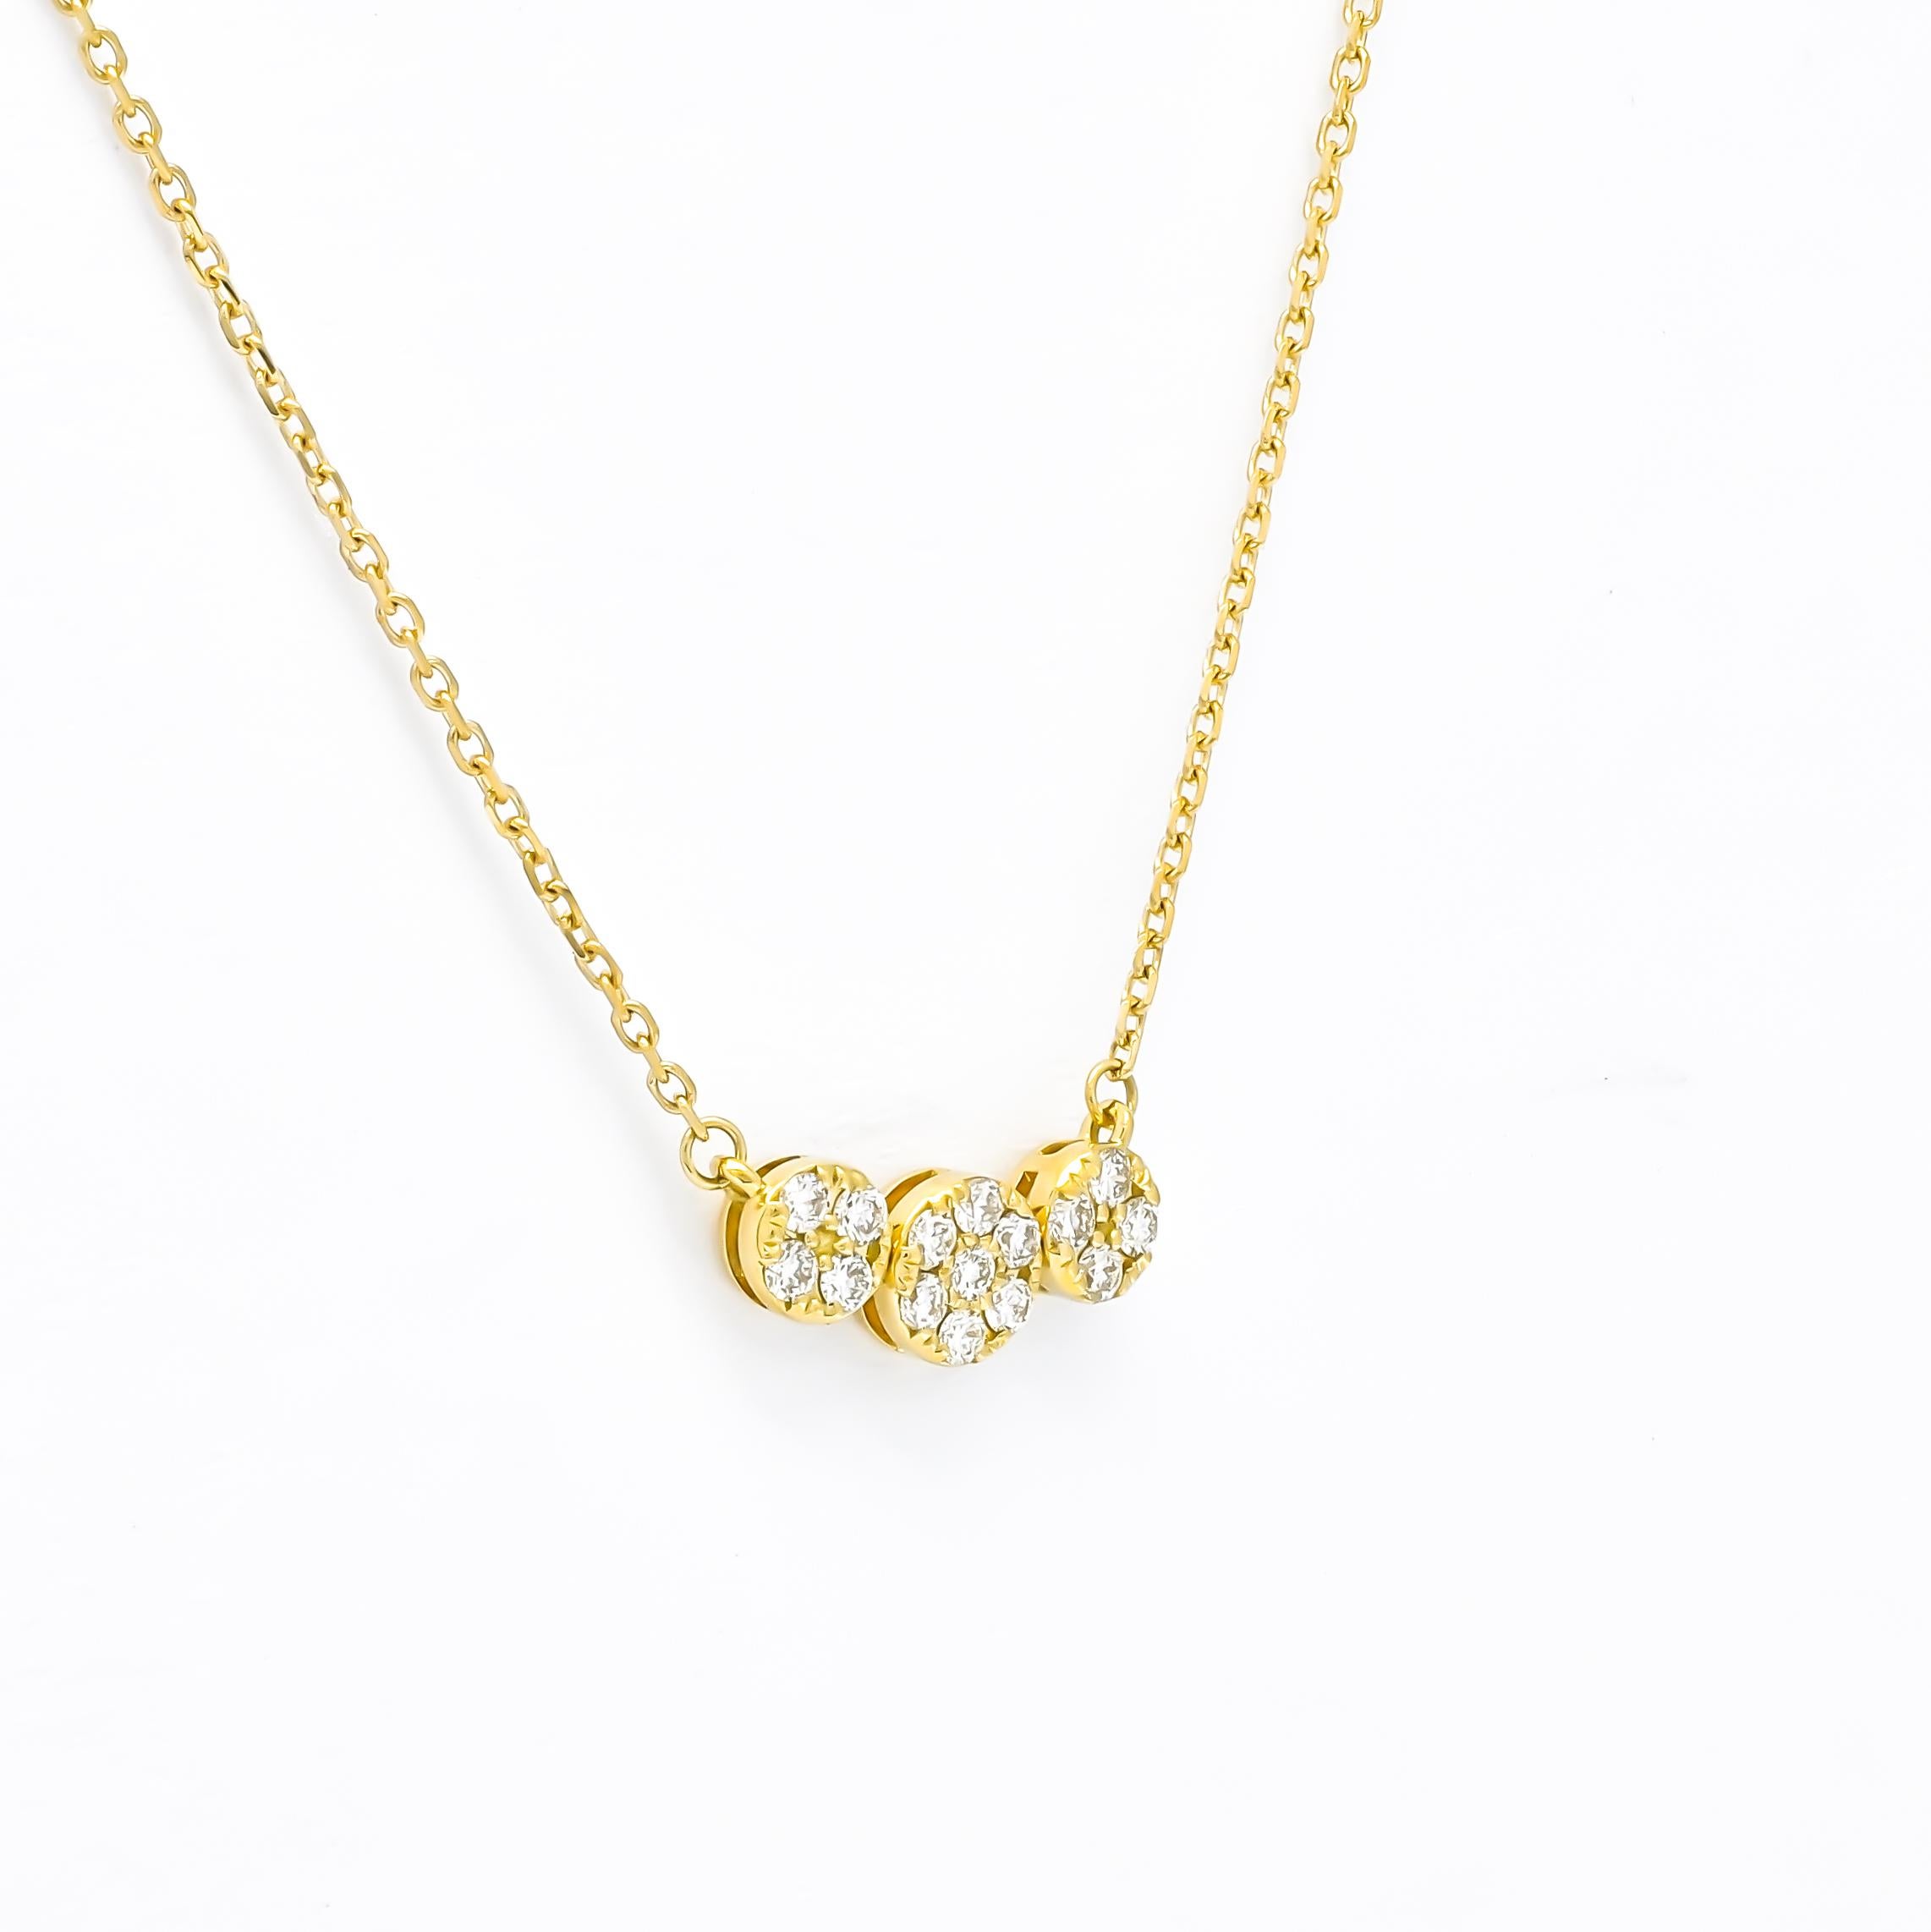 Round Cut Natural Diamond 0.17 carats 18 KT Yellow Gold Chain Pendant Necklace  For Sale